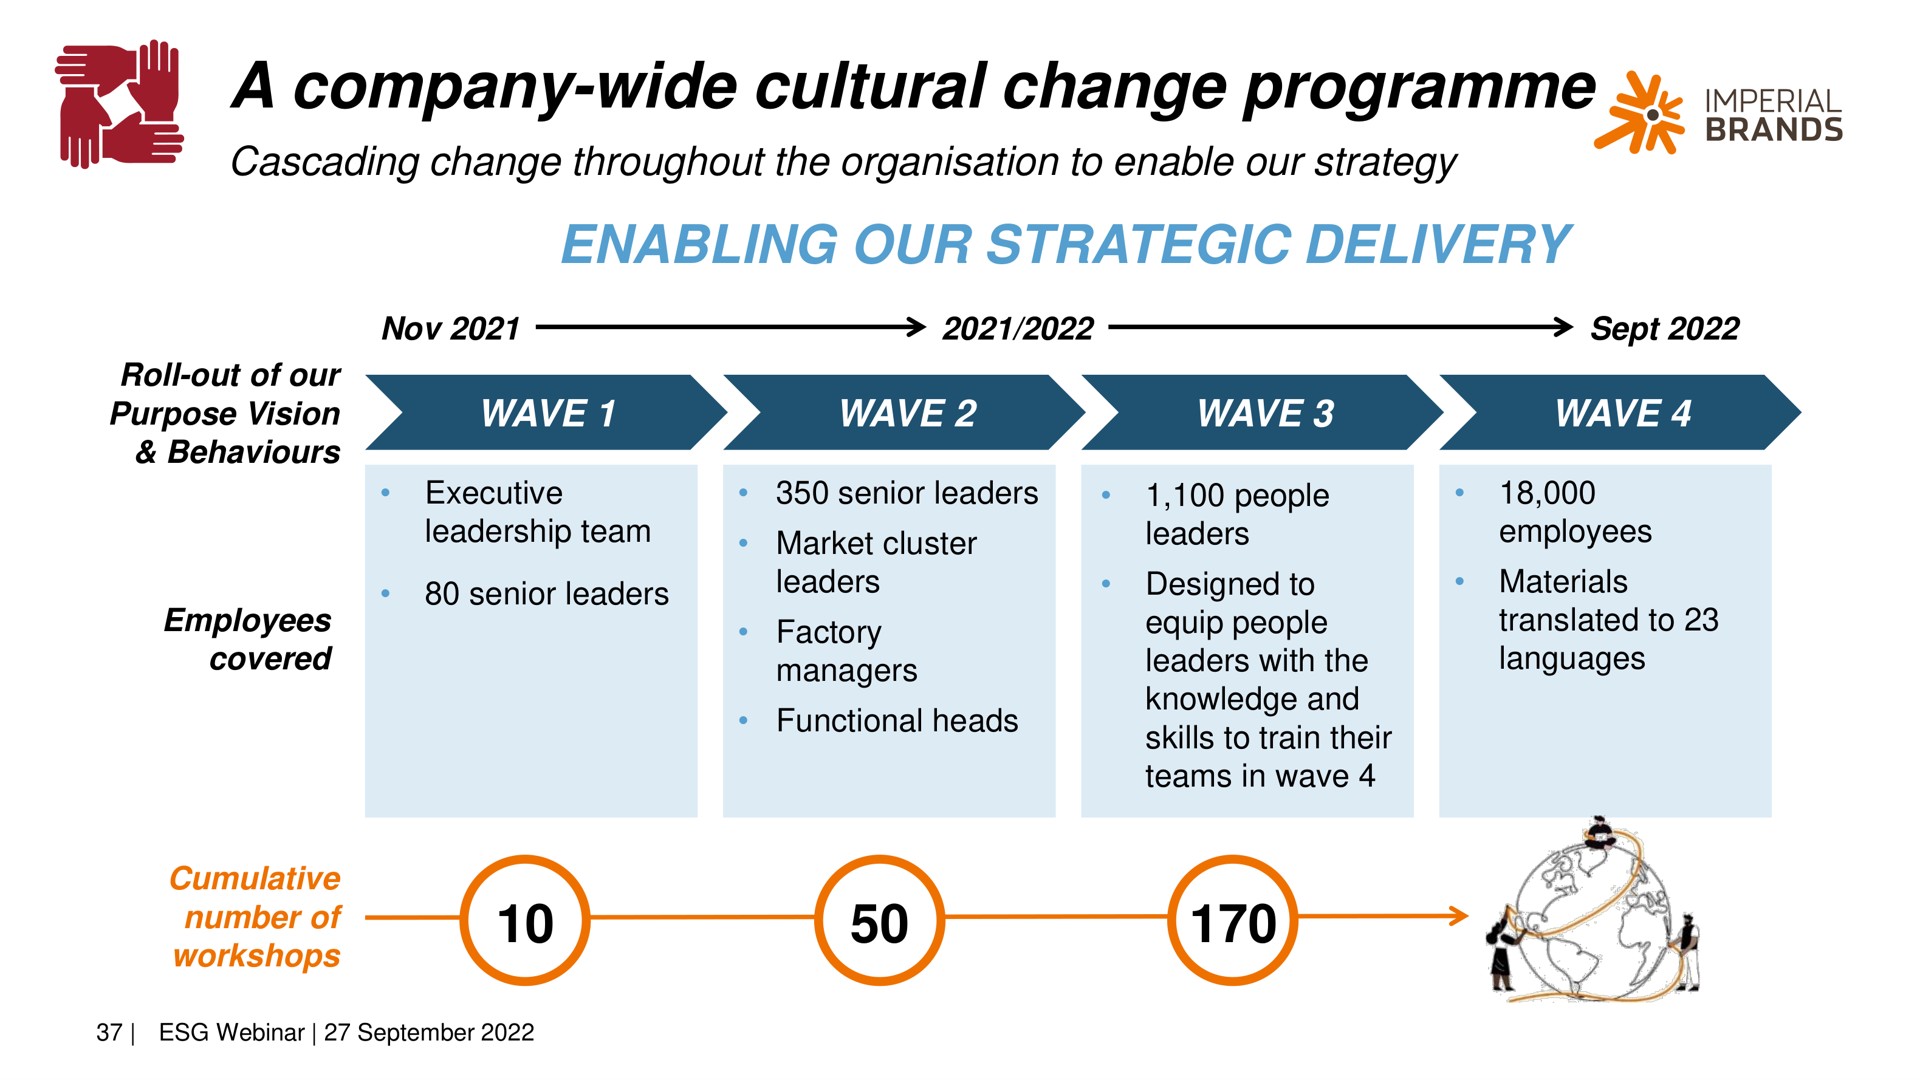 a company wide cultural change enabling our strategic delivery he me imperial | Imperial Brands